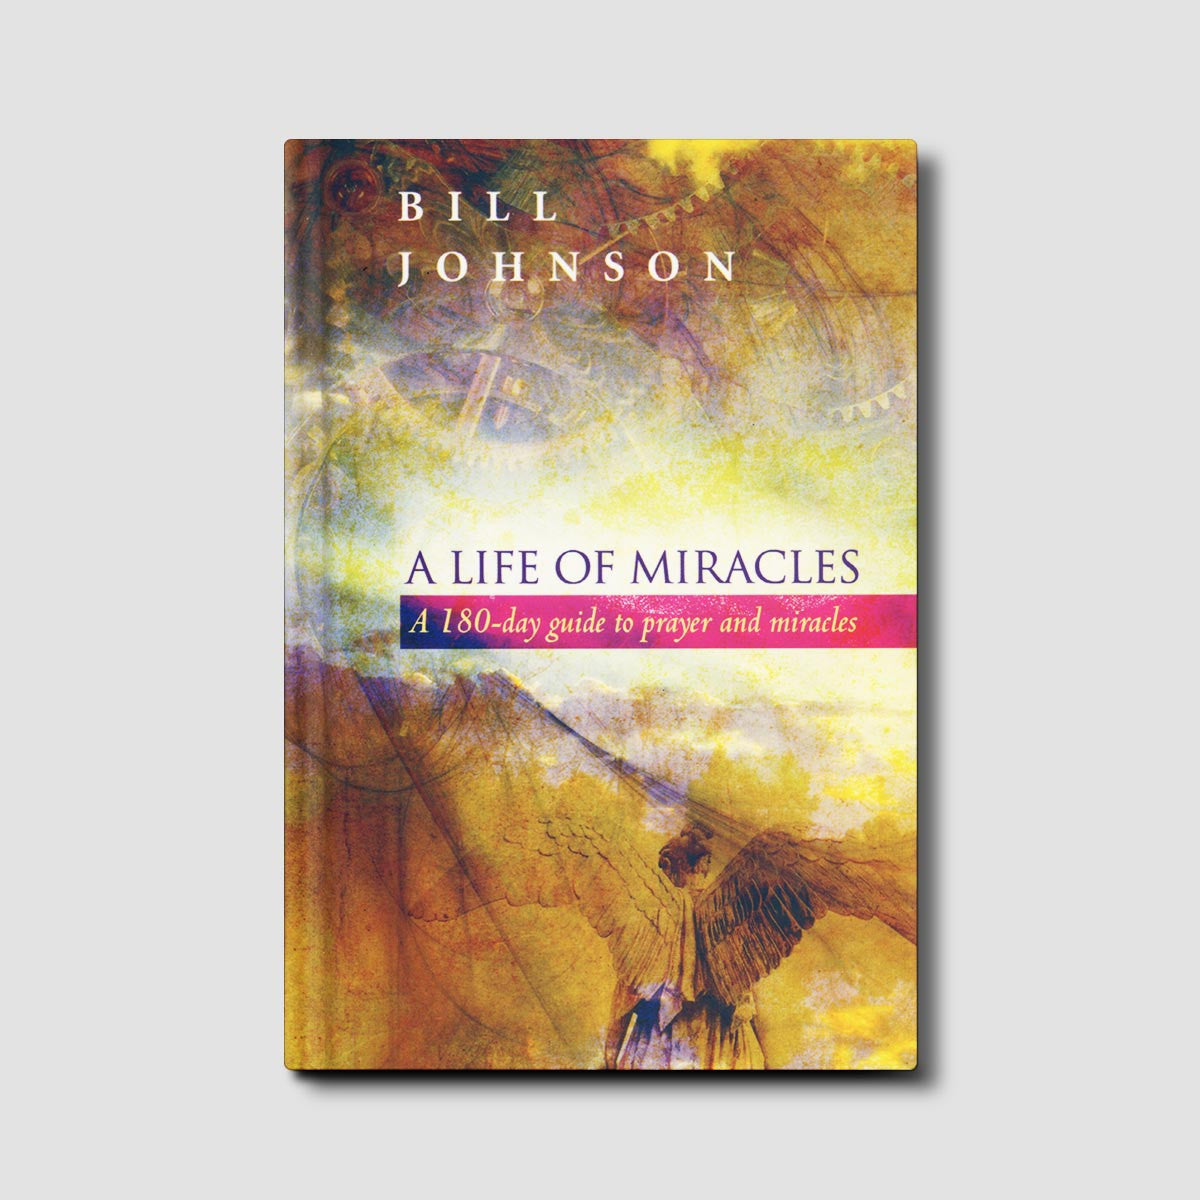 A Life of Miracles: A 365 day guide to prayer and miracles